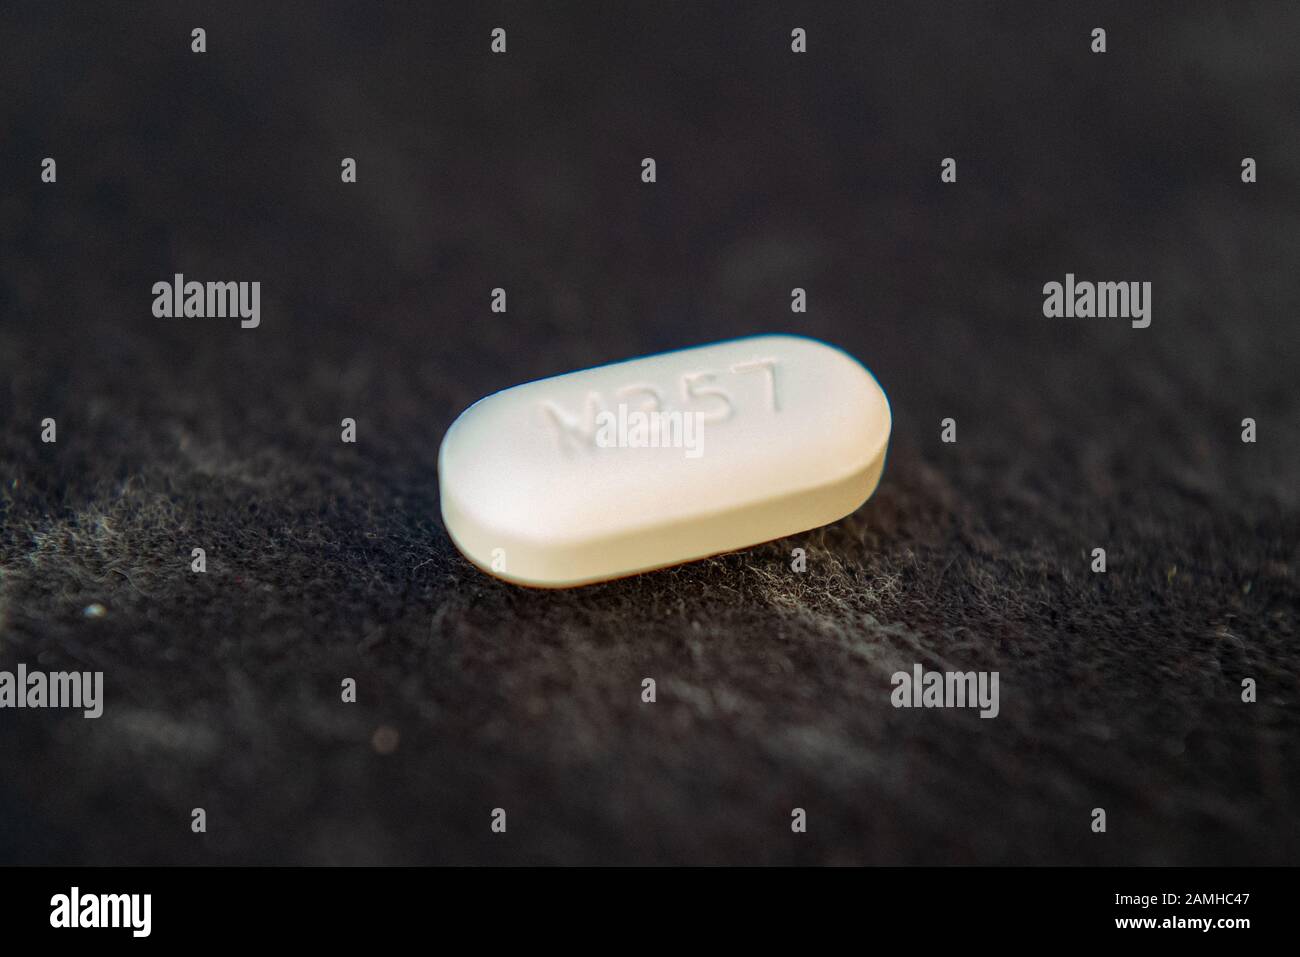 Illustrative image, close-up of pill of the combination narcotic opioid pain medication hydrocodone 5-acetaminophen 500, marketed under the trade names Vicodin or Lortab, San Ramon, California, December 10, 2019. Many regulators and lawmakers are focusing on the opioid crisis in the United States, which has led to addiction and illegal drug use. () Stock Photo